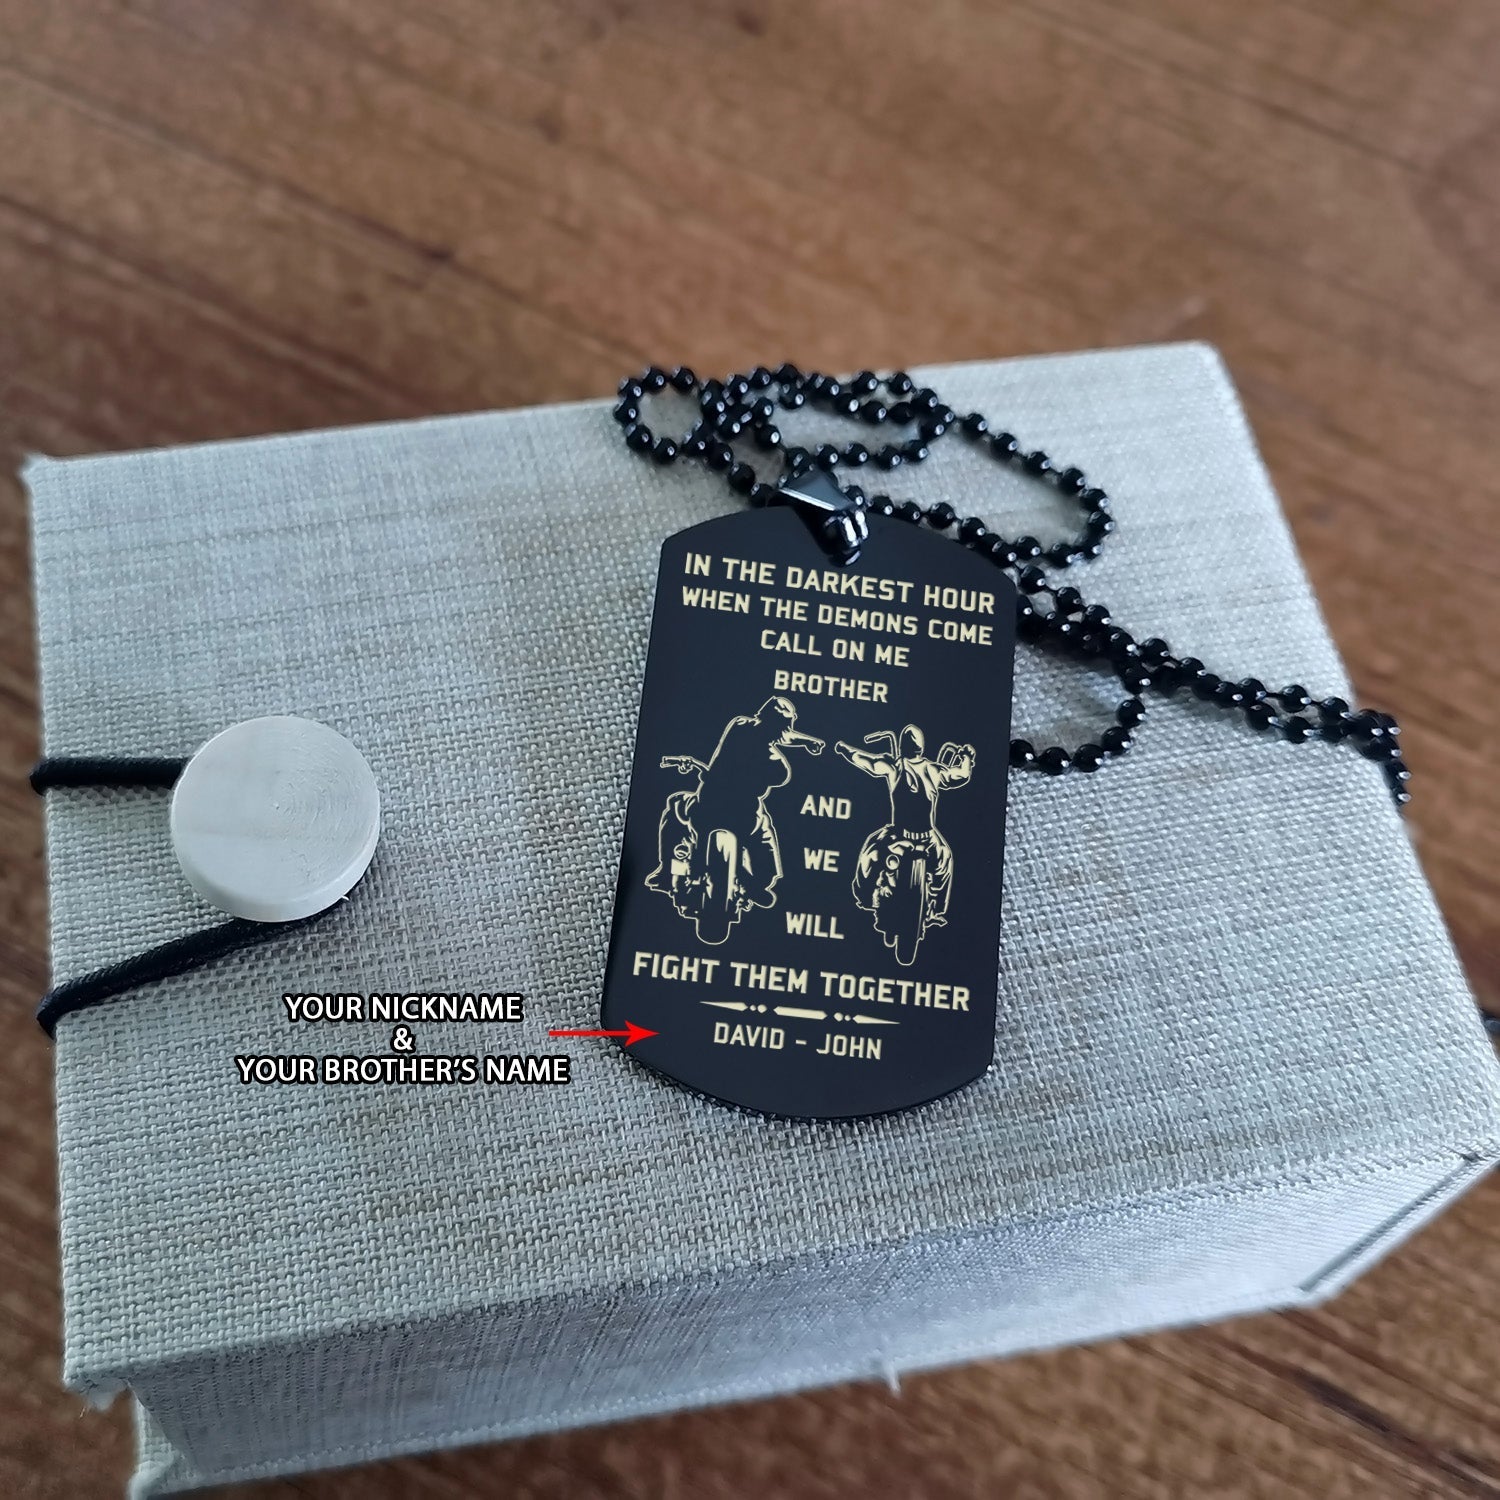 Customizable engraved dog tag gift from brother, In the darkest hour, When the demons come call on me brother and we will fight them together